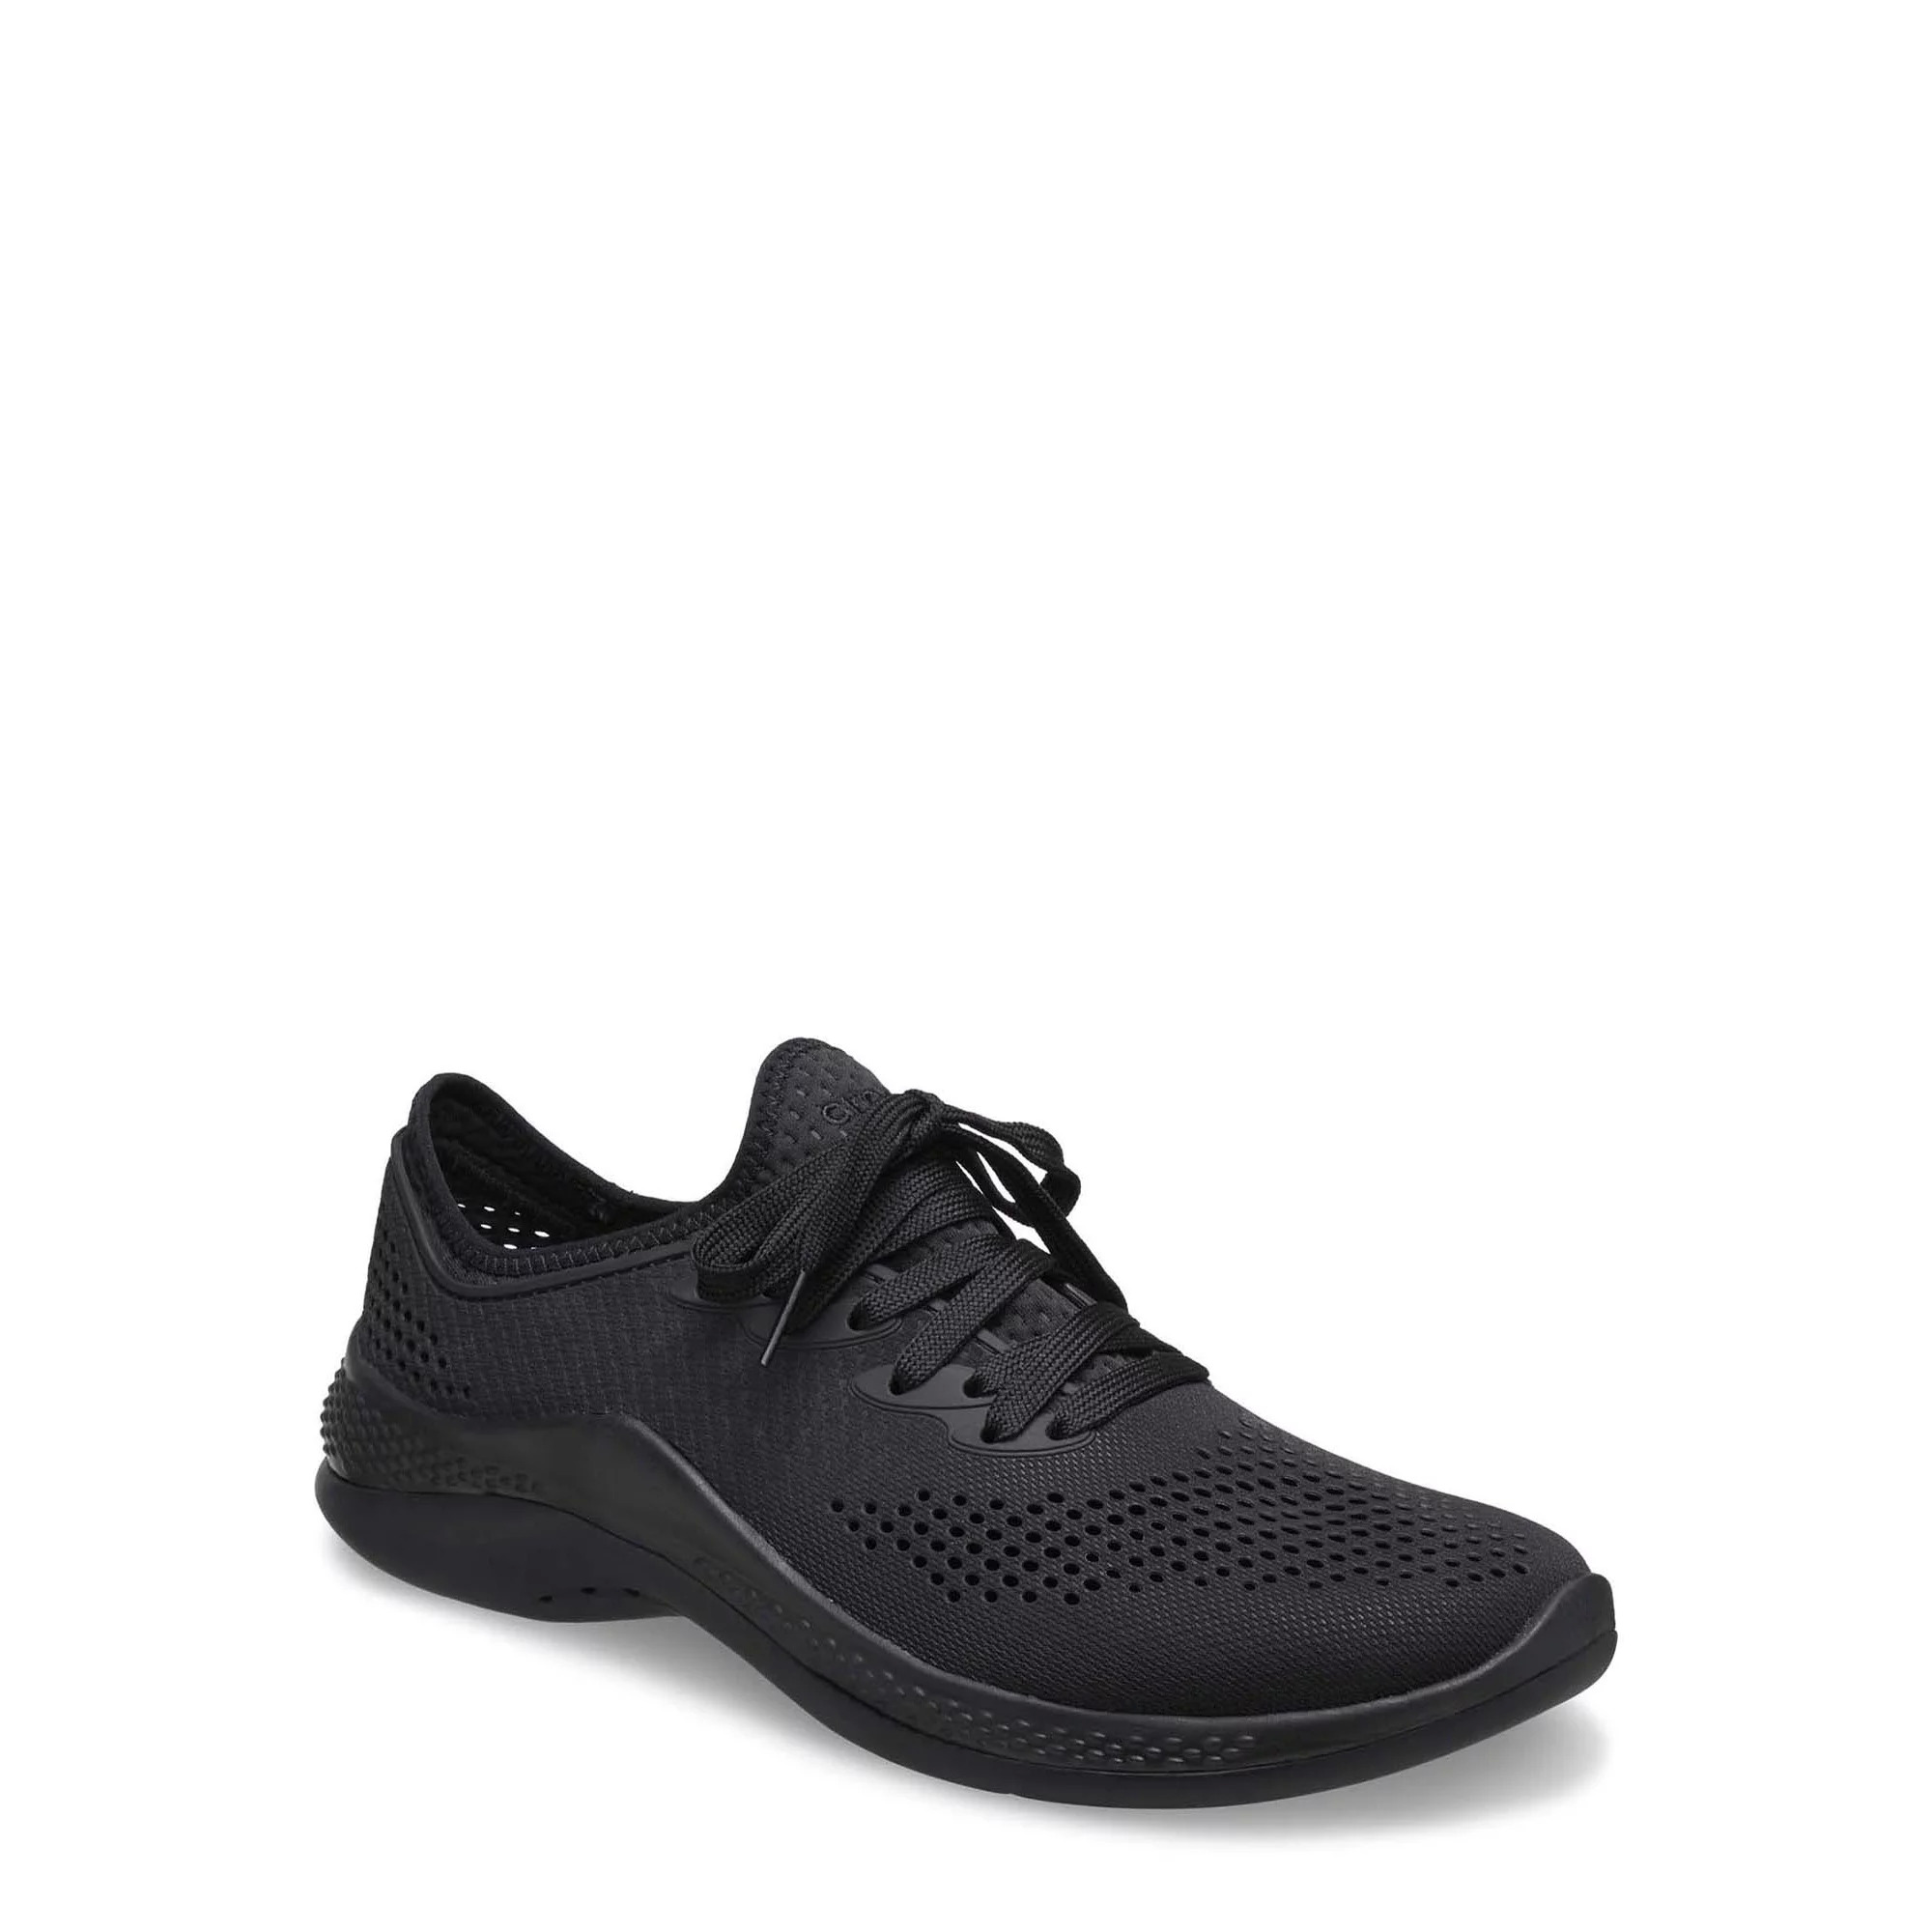 Crocs Men's LiteRide 360 Pacer Lace-up Sneaker (Various Colors & Sizes) $24.23 + Free S&H w/ Walmart+ or $35+